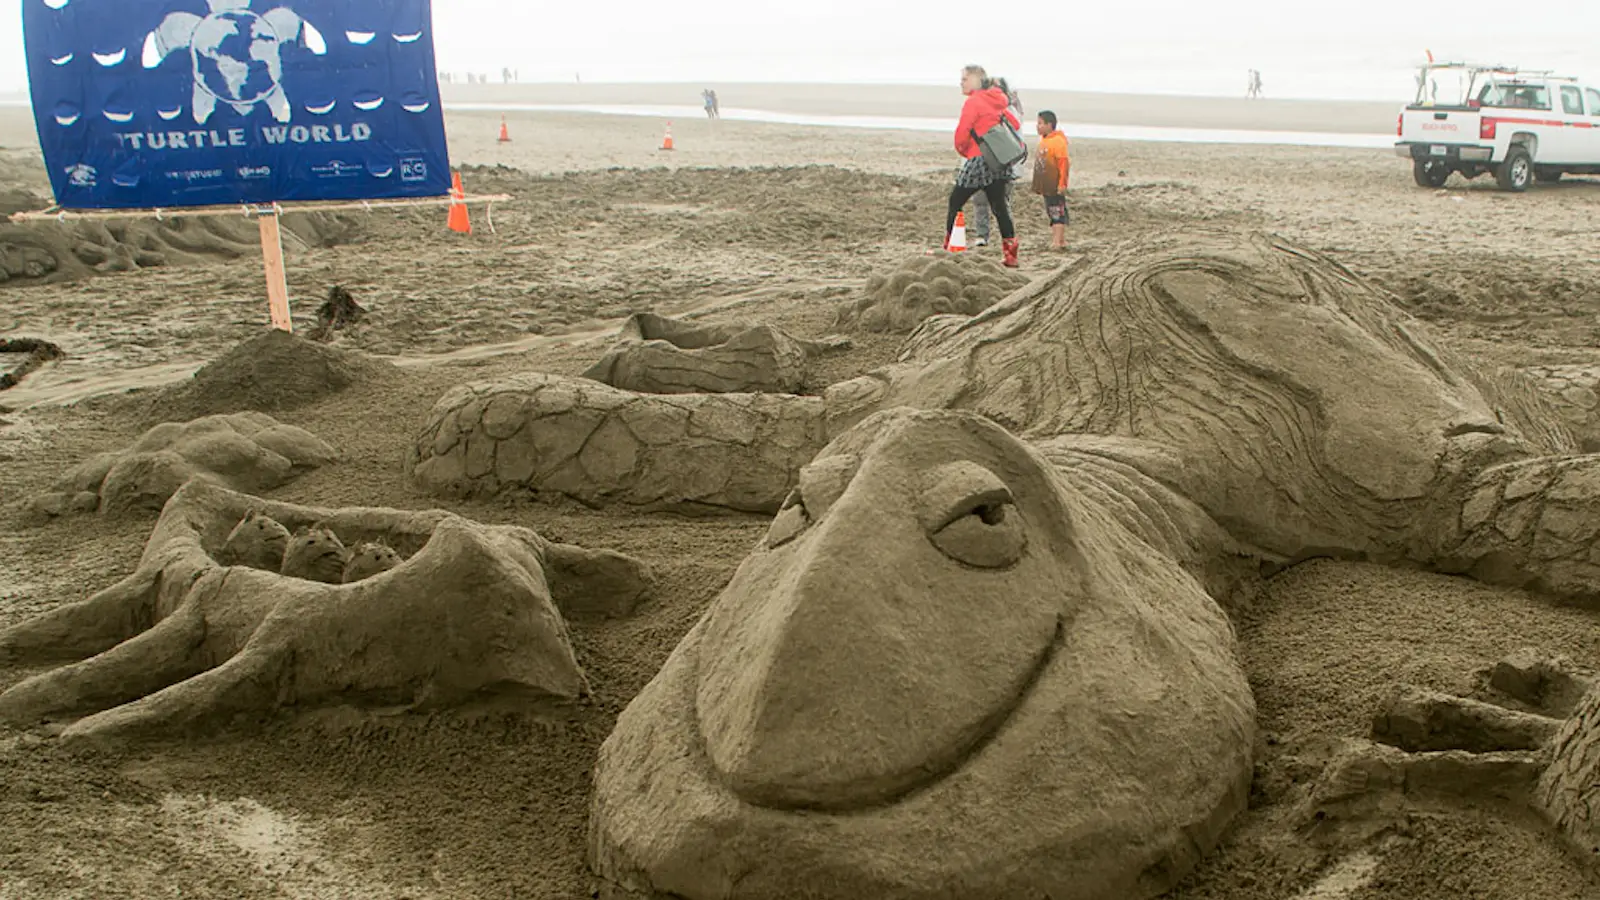 Giant turtle sculpture made out of sand at San Francisco sandcastle competition